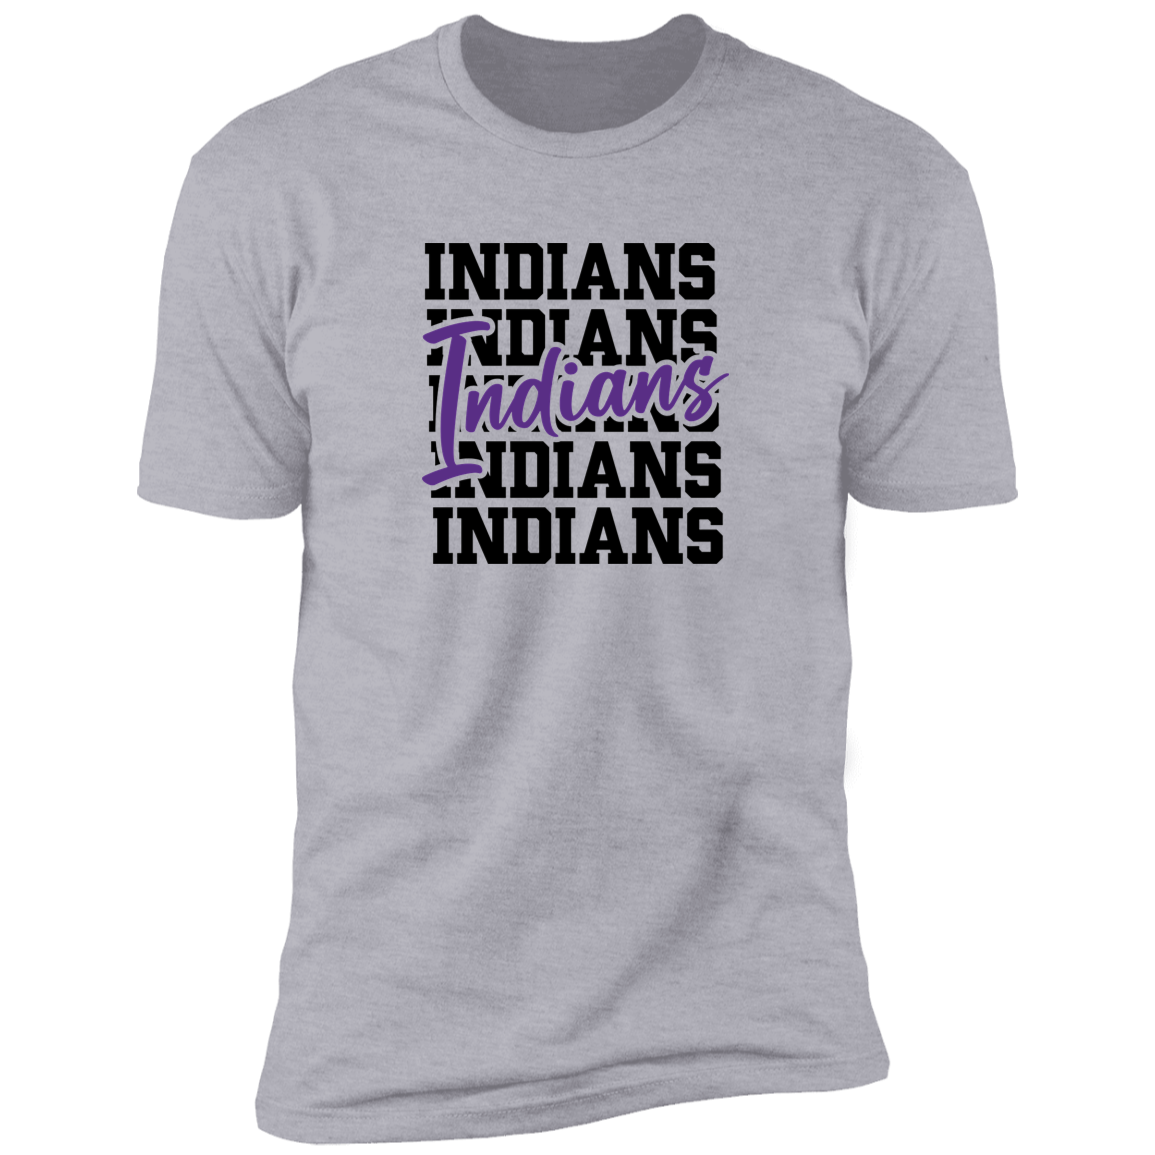 Pacific Indians - New Design 1